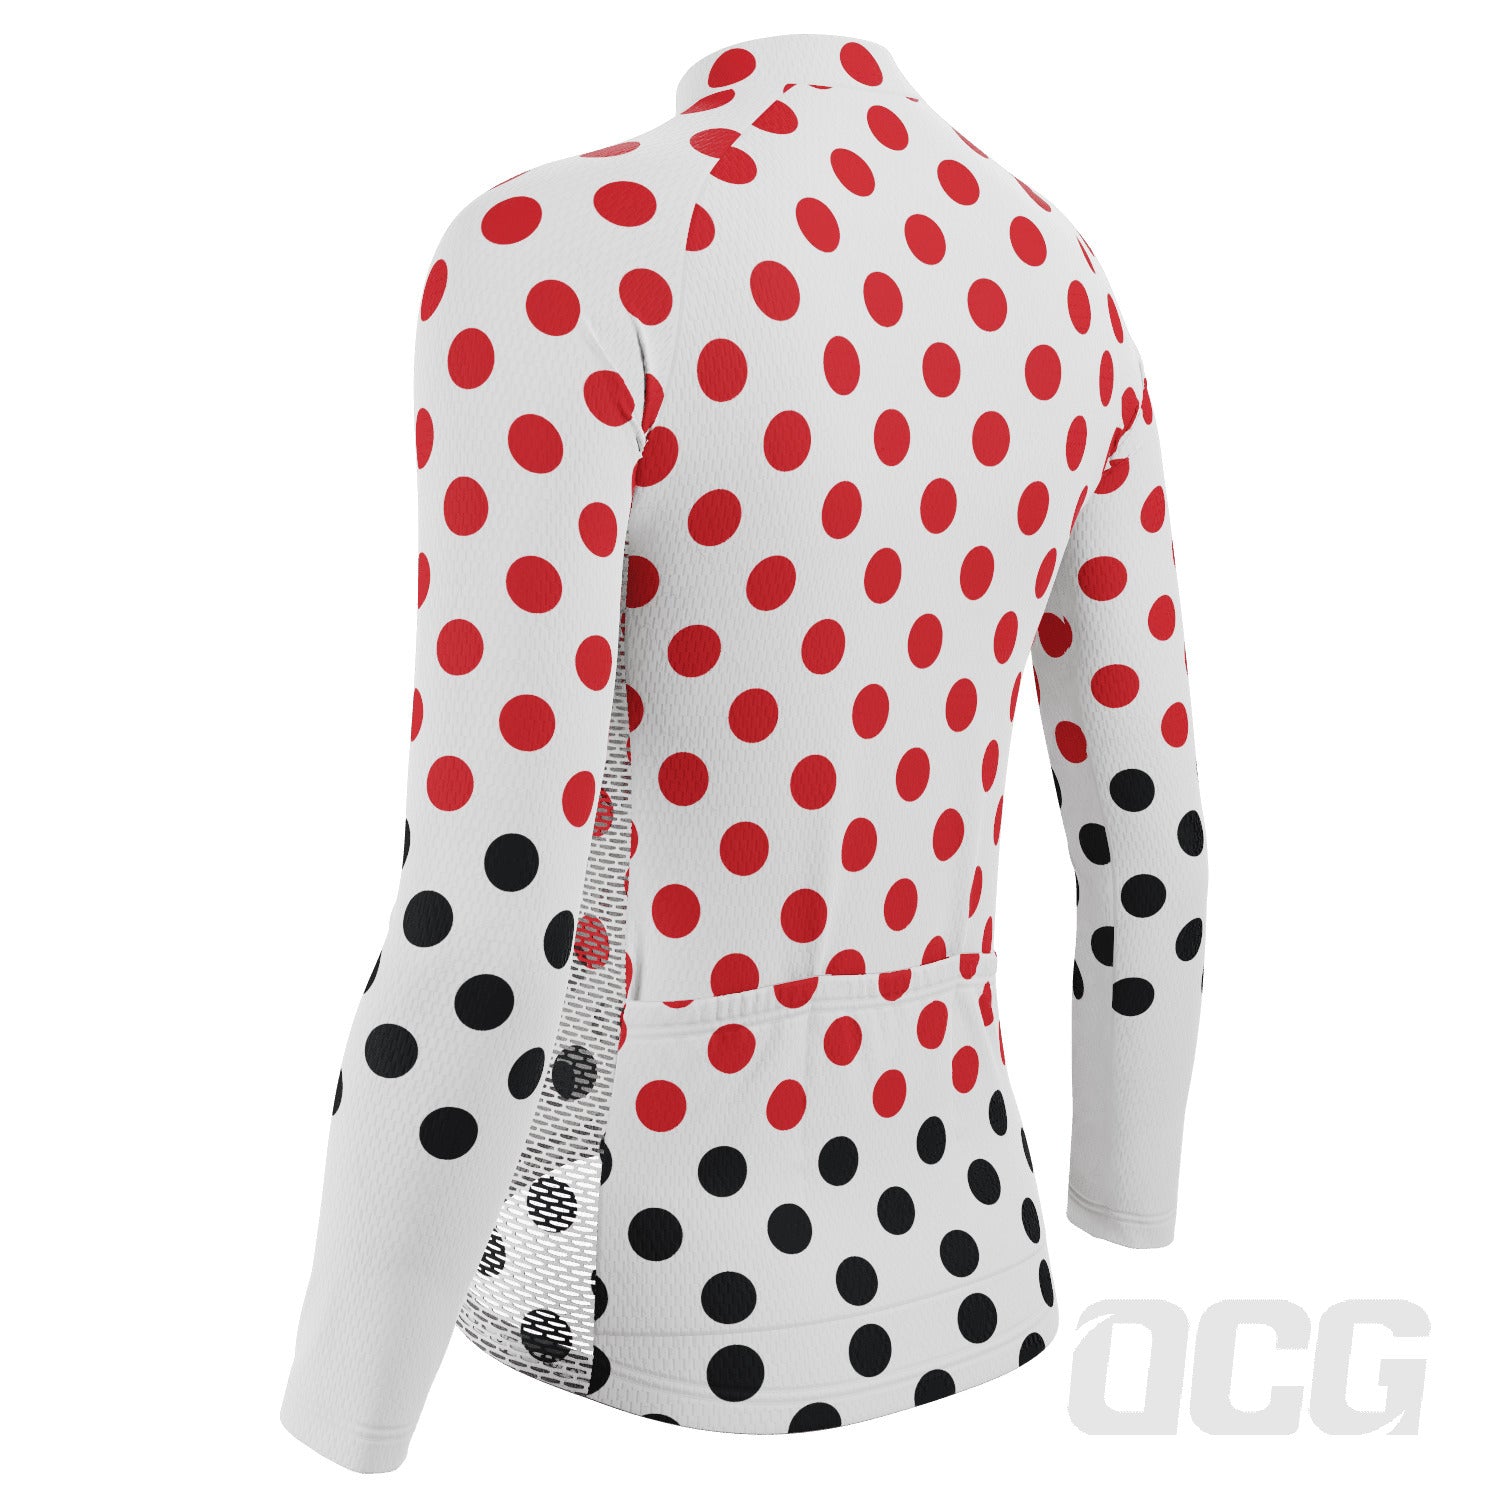 Women's Red Polka Dots on White Long Sleeve Cycling Jersey